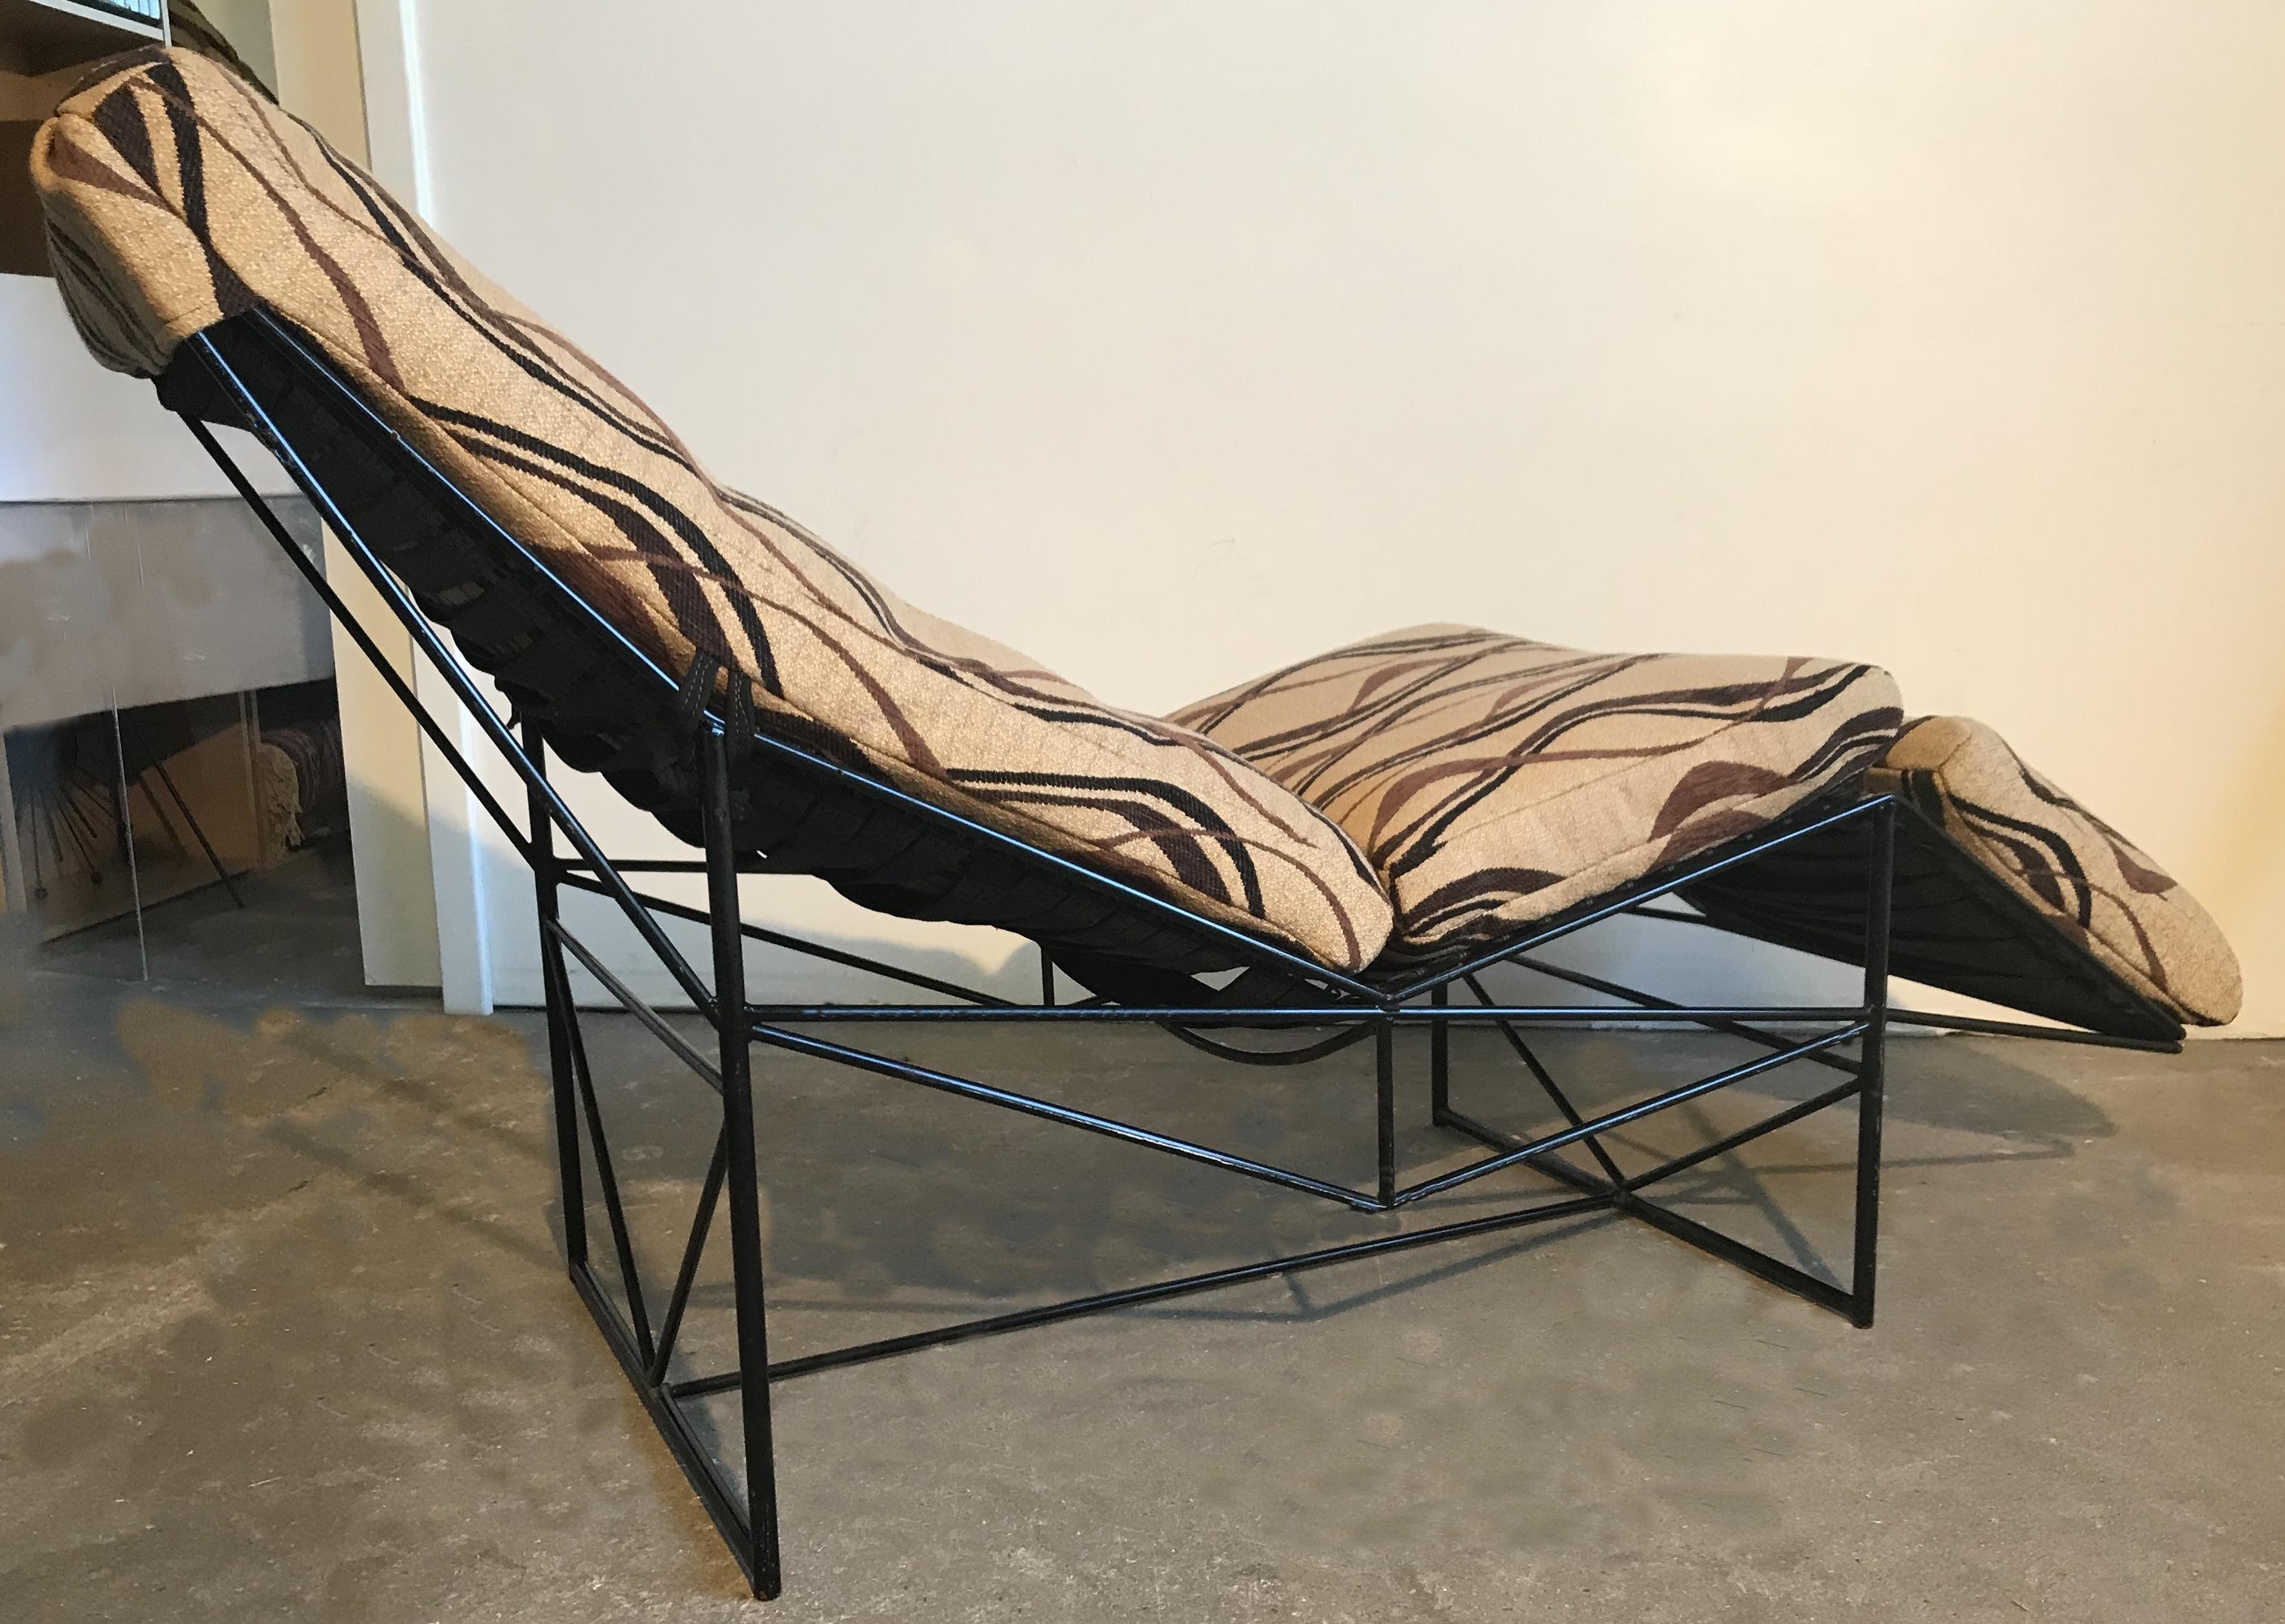 Sculptural Chaise Lounge by Paolo Passerini, 1985 im Zustand „Gut“ in Pasadena, CA